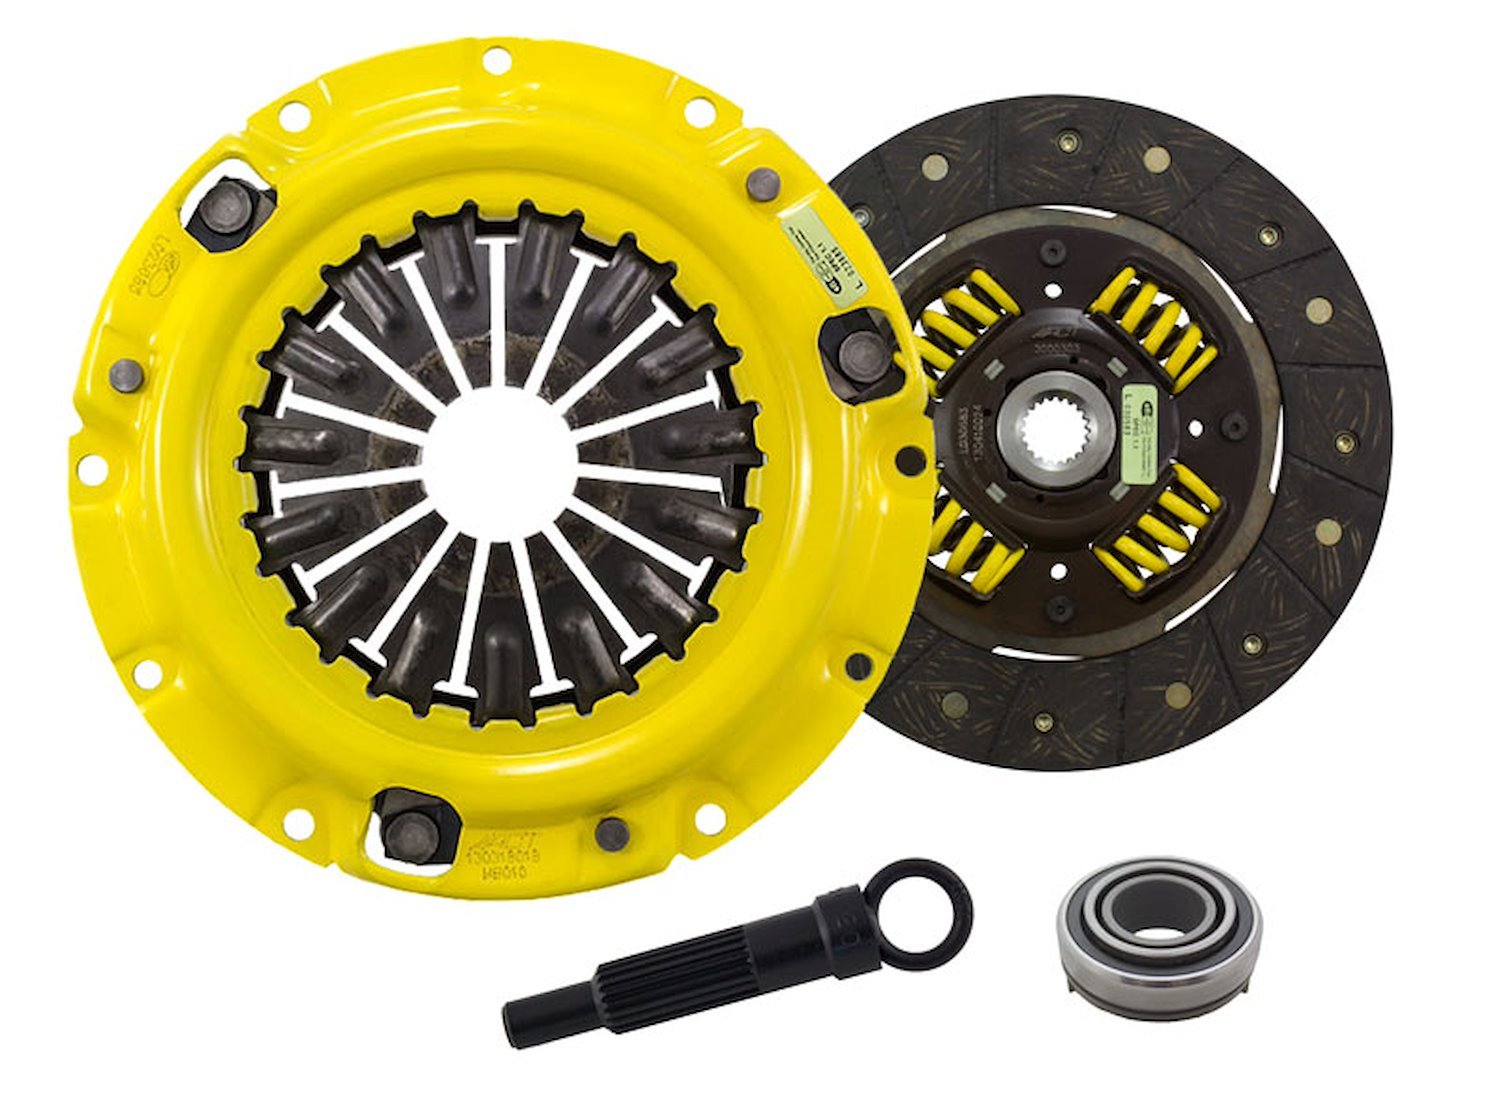 HD/Performance Street Sprung Transmission Clutch Kit Fits Select Chrysler/Dodge/Eagle/Mitsubishi/Plymouth